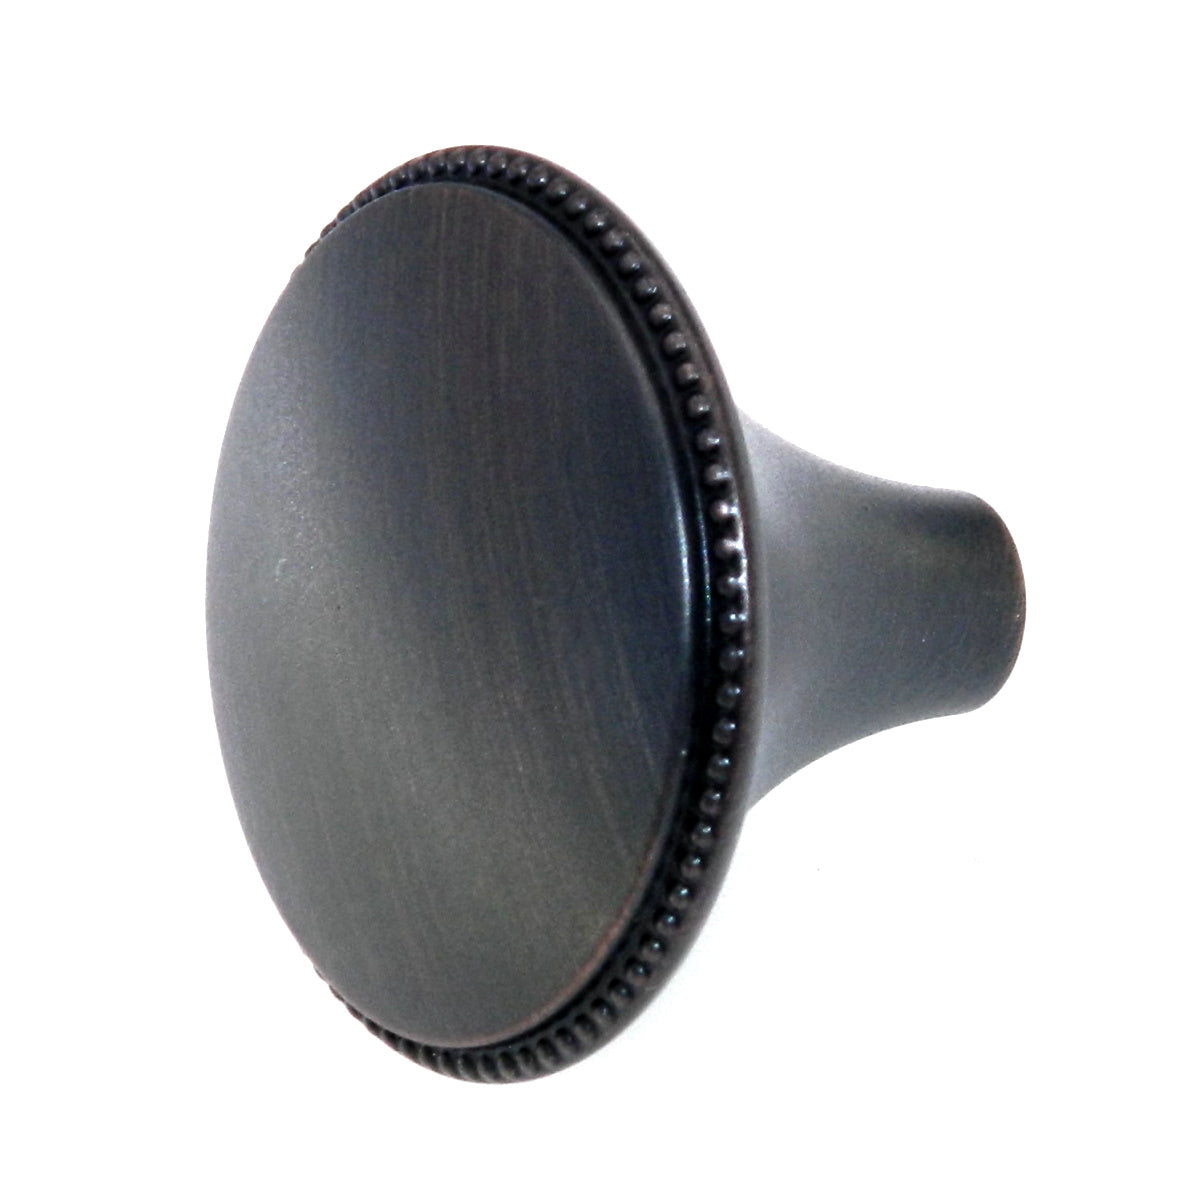 Amerock Atherly Oil-Rubbed Bronze 1 9/16" Round Cabinet Knob Pull BP29305-ORB